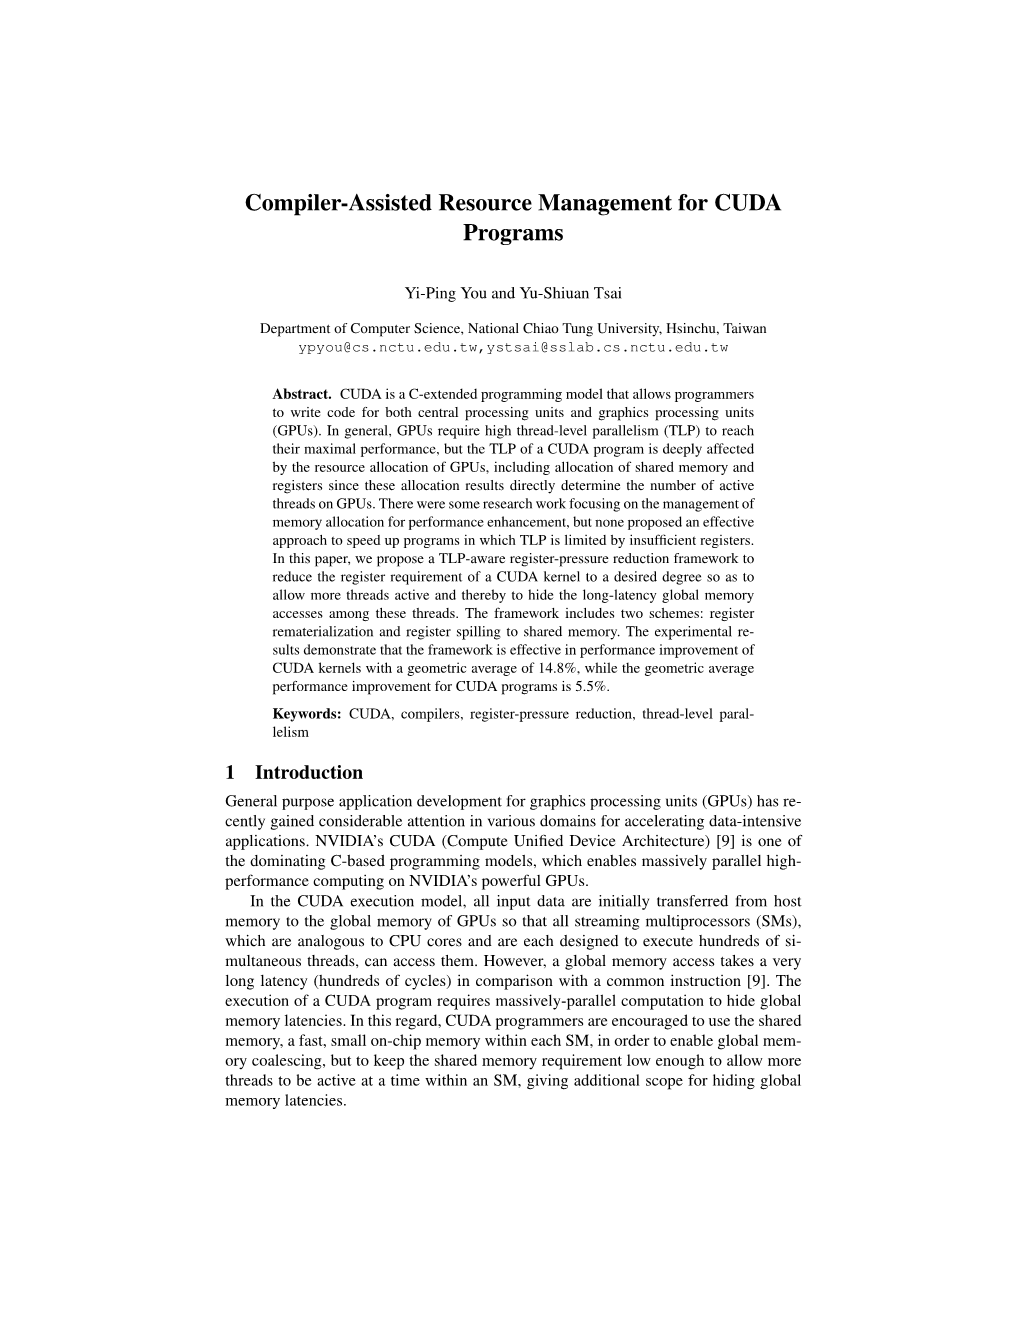 Compiler-Assisted Resource Management for CUDA Programs